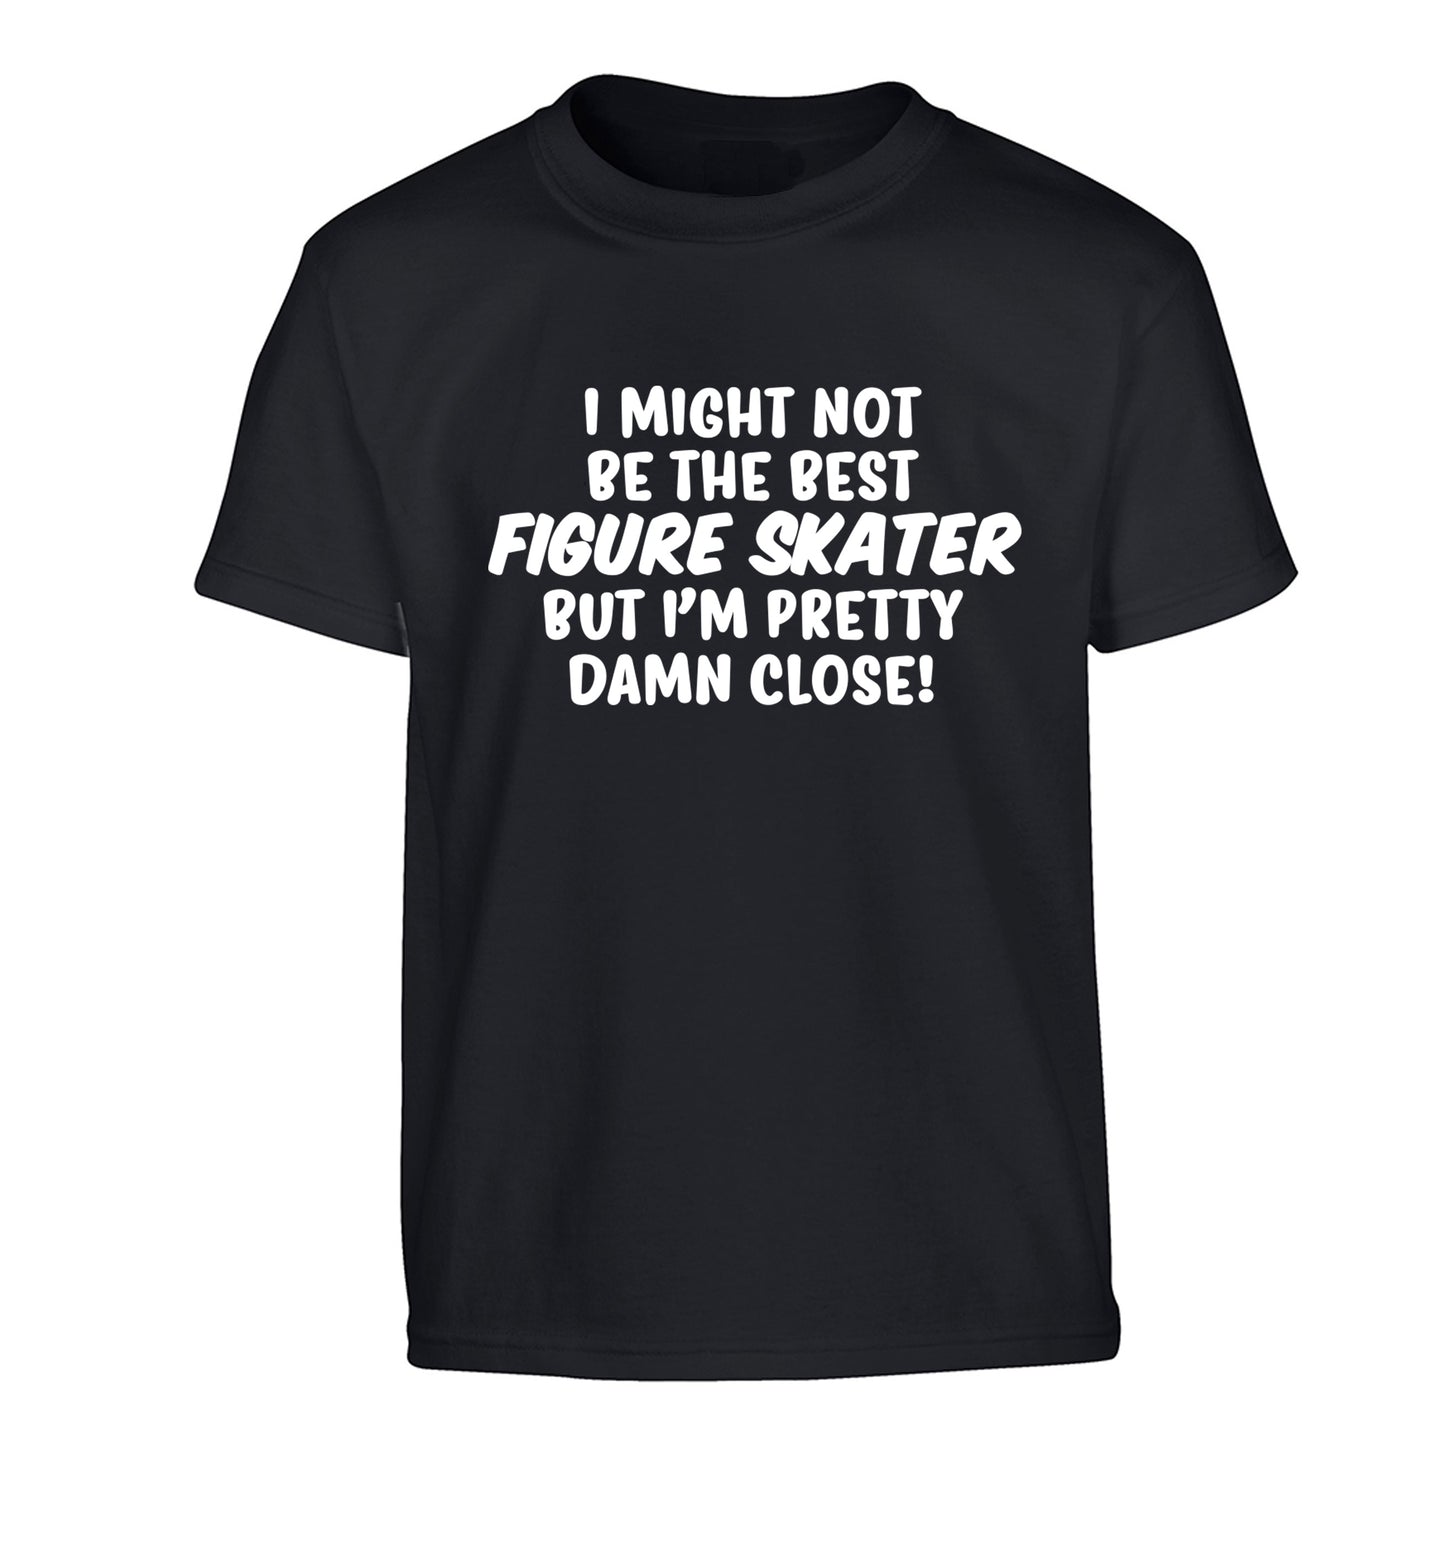 I might not be the best figure skater but I'm pretty damn close! Children's black Tshirt 12-14 Years